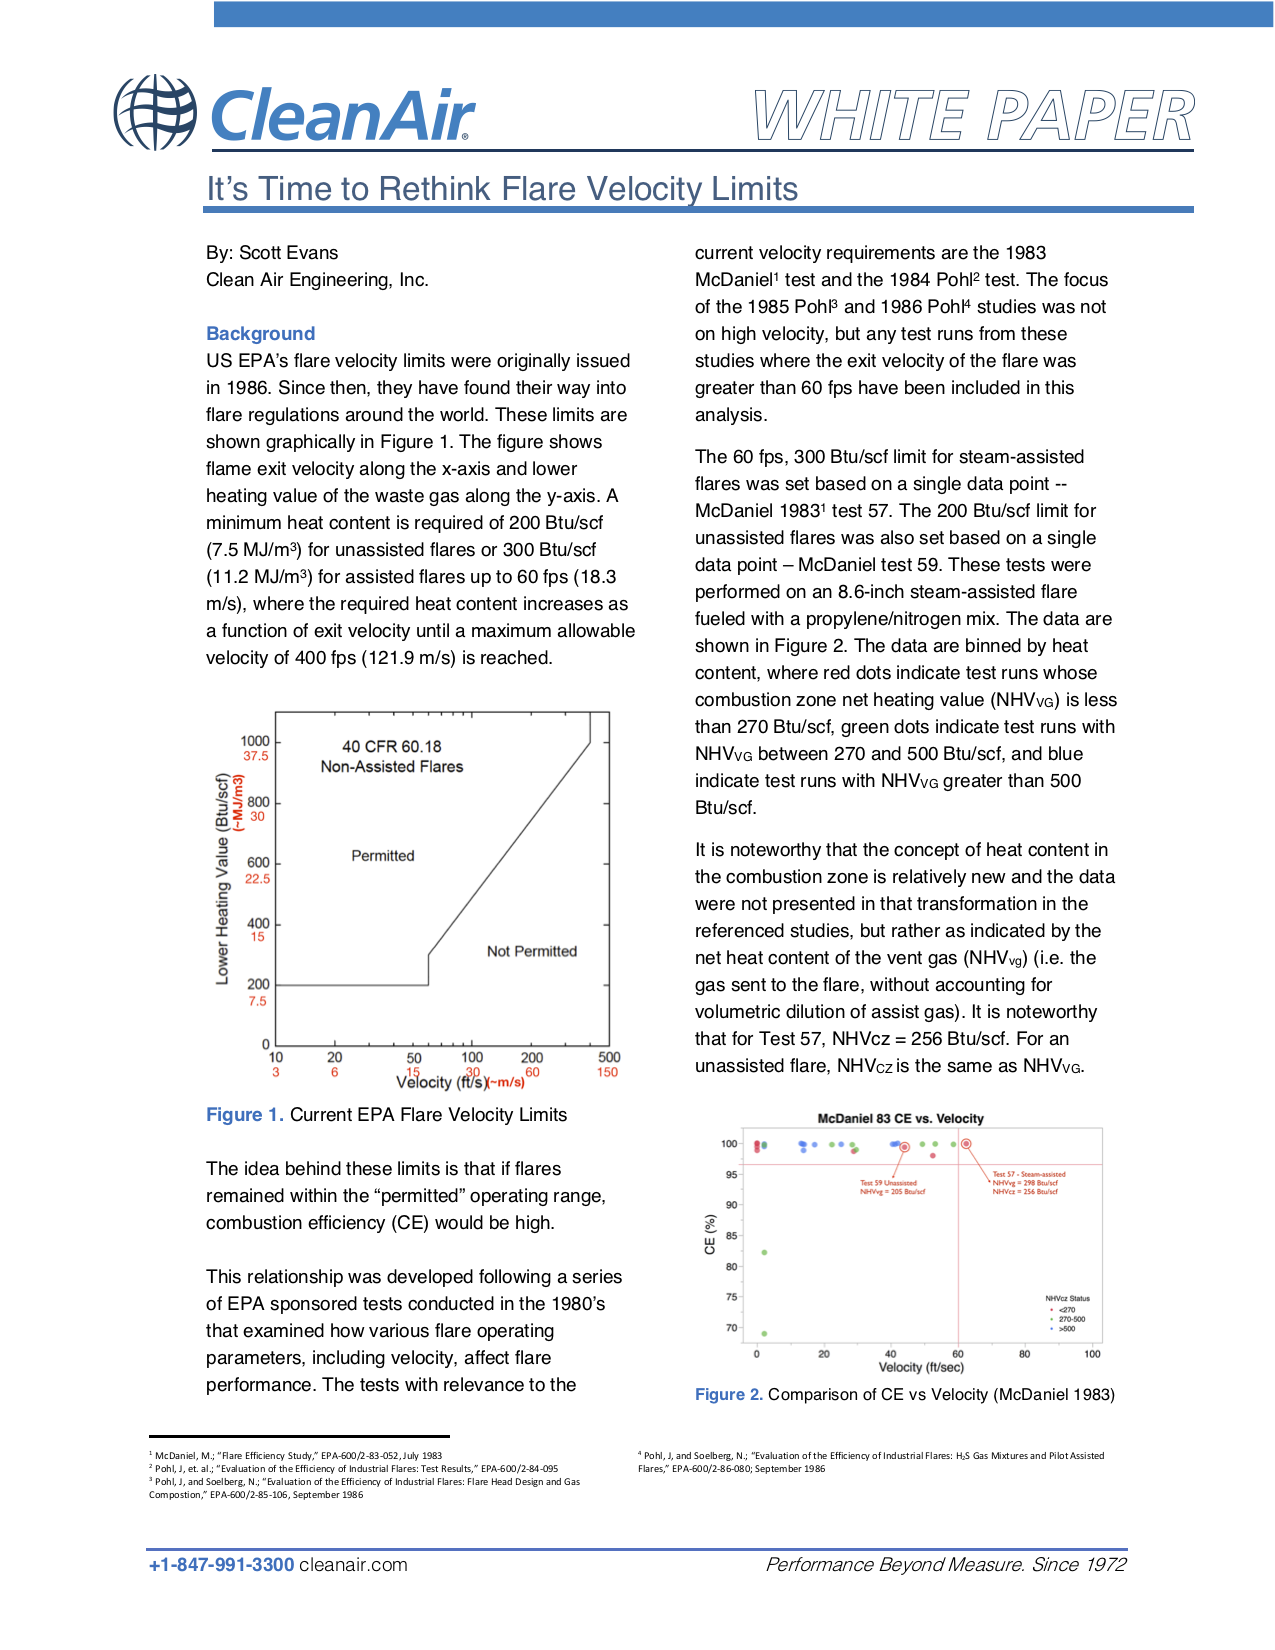 It's Time to Rethink Flare Velocity Limits White Paper (dragged).png